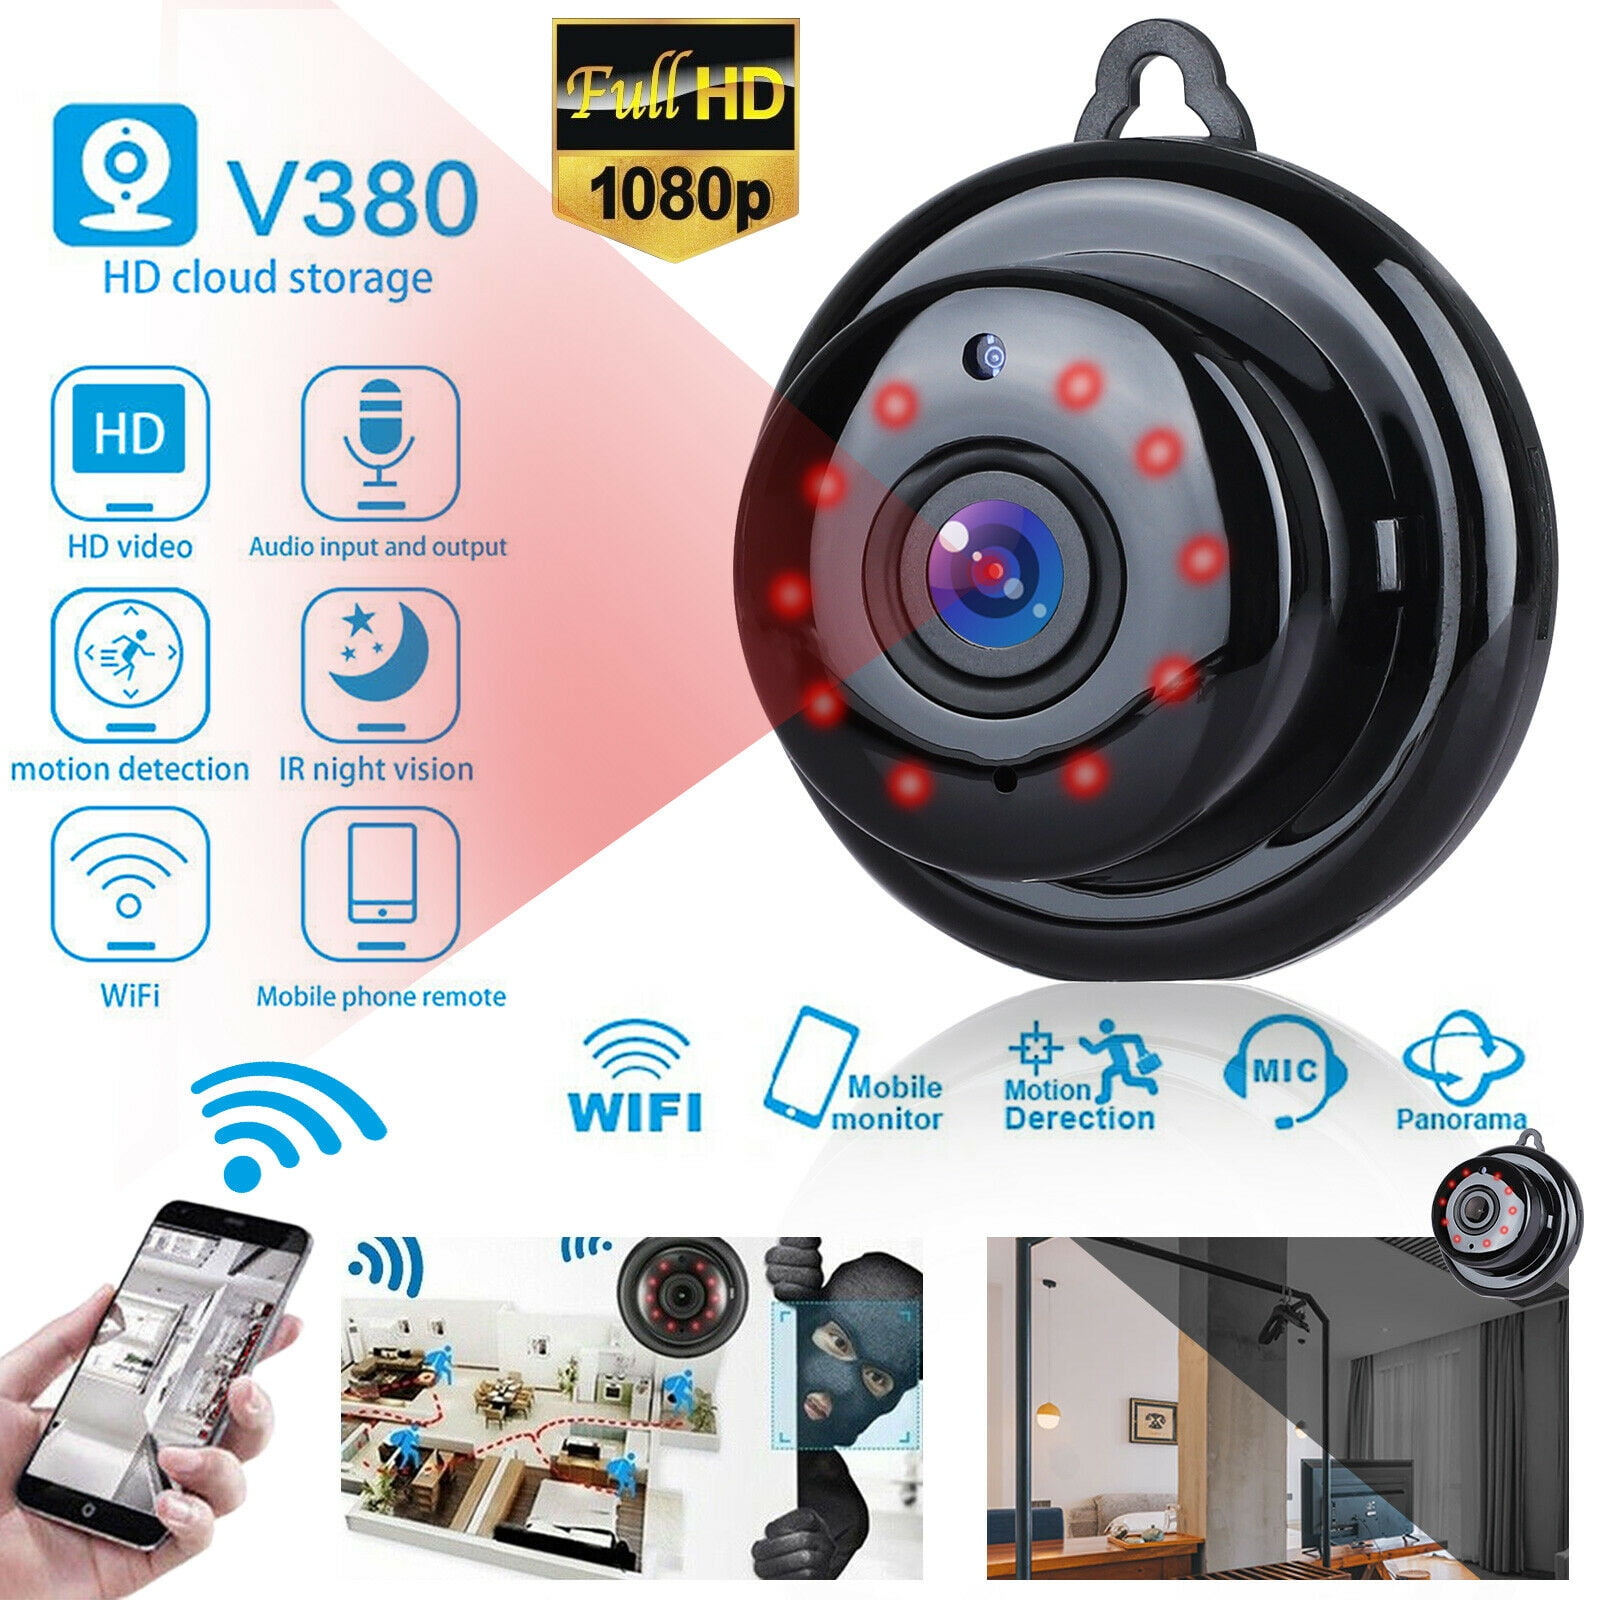 Spy Camera Mini Hidden Camera YEEHAO HD 1080P with Audio Motion Detection IR Night Vision Nanny Surveillance Camera for Home Indoor Outdoor Security Camera with Built-in Battery 32GB Micro SD Card